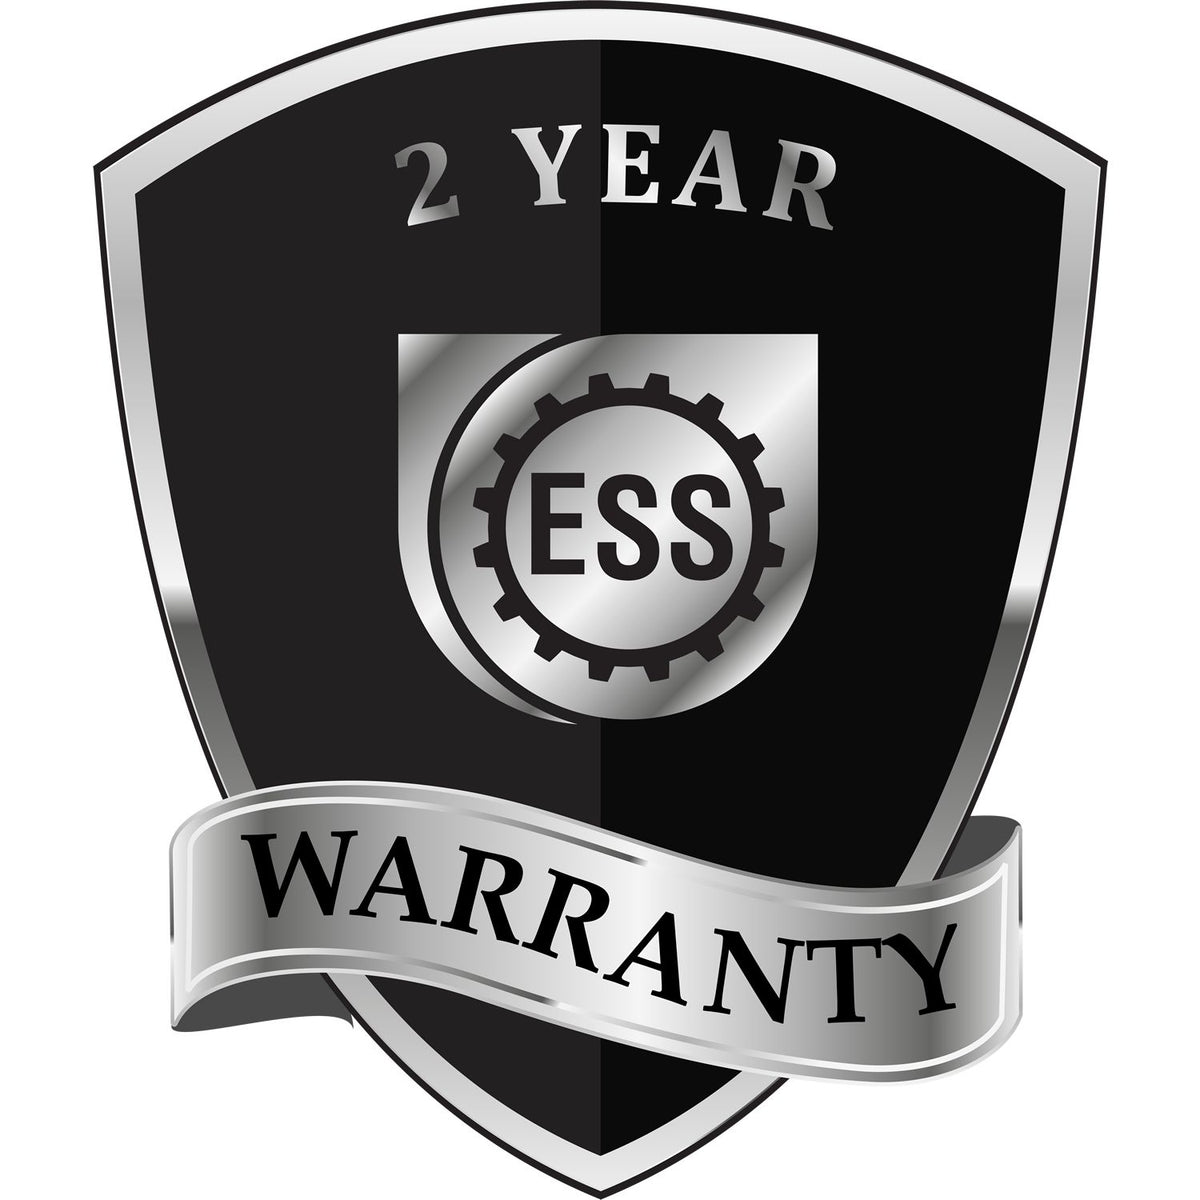 A black and silver badge or emblem showing warranty information for the Hybrid Florida Engineer Seal